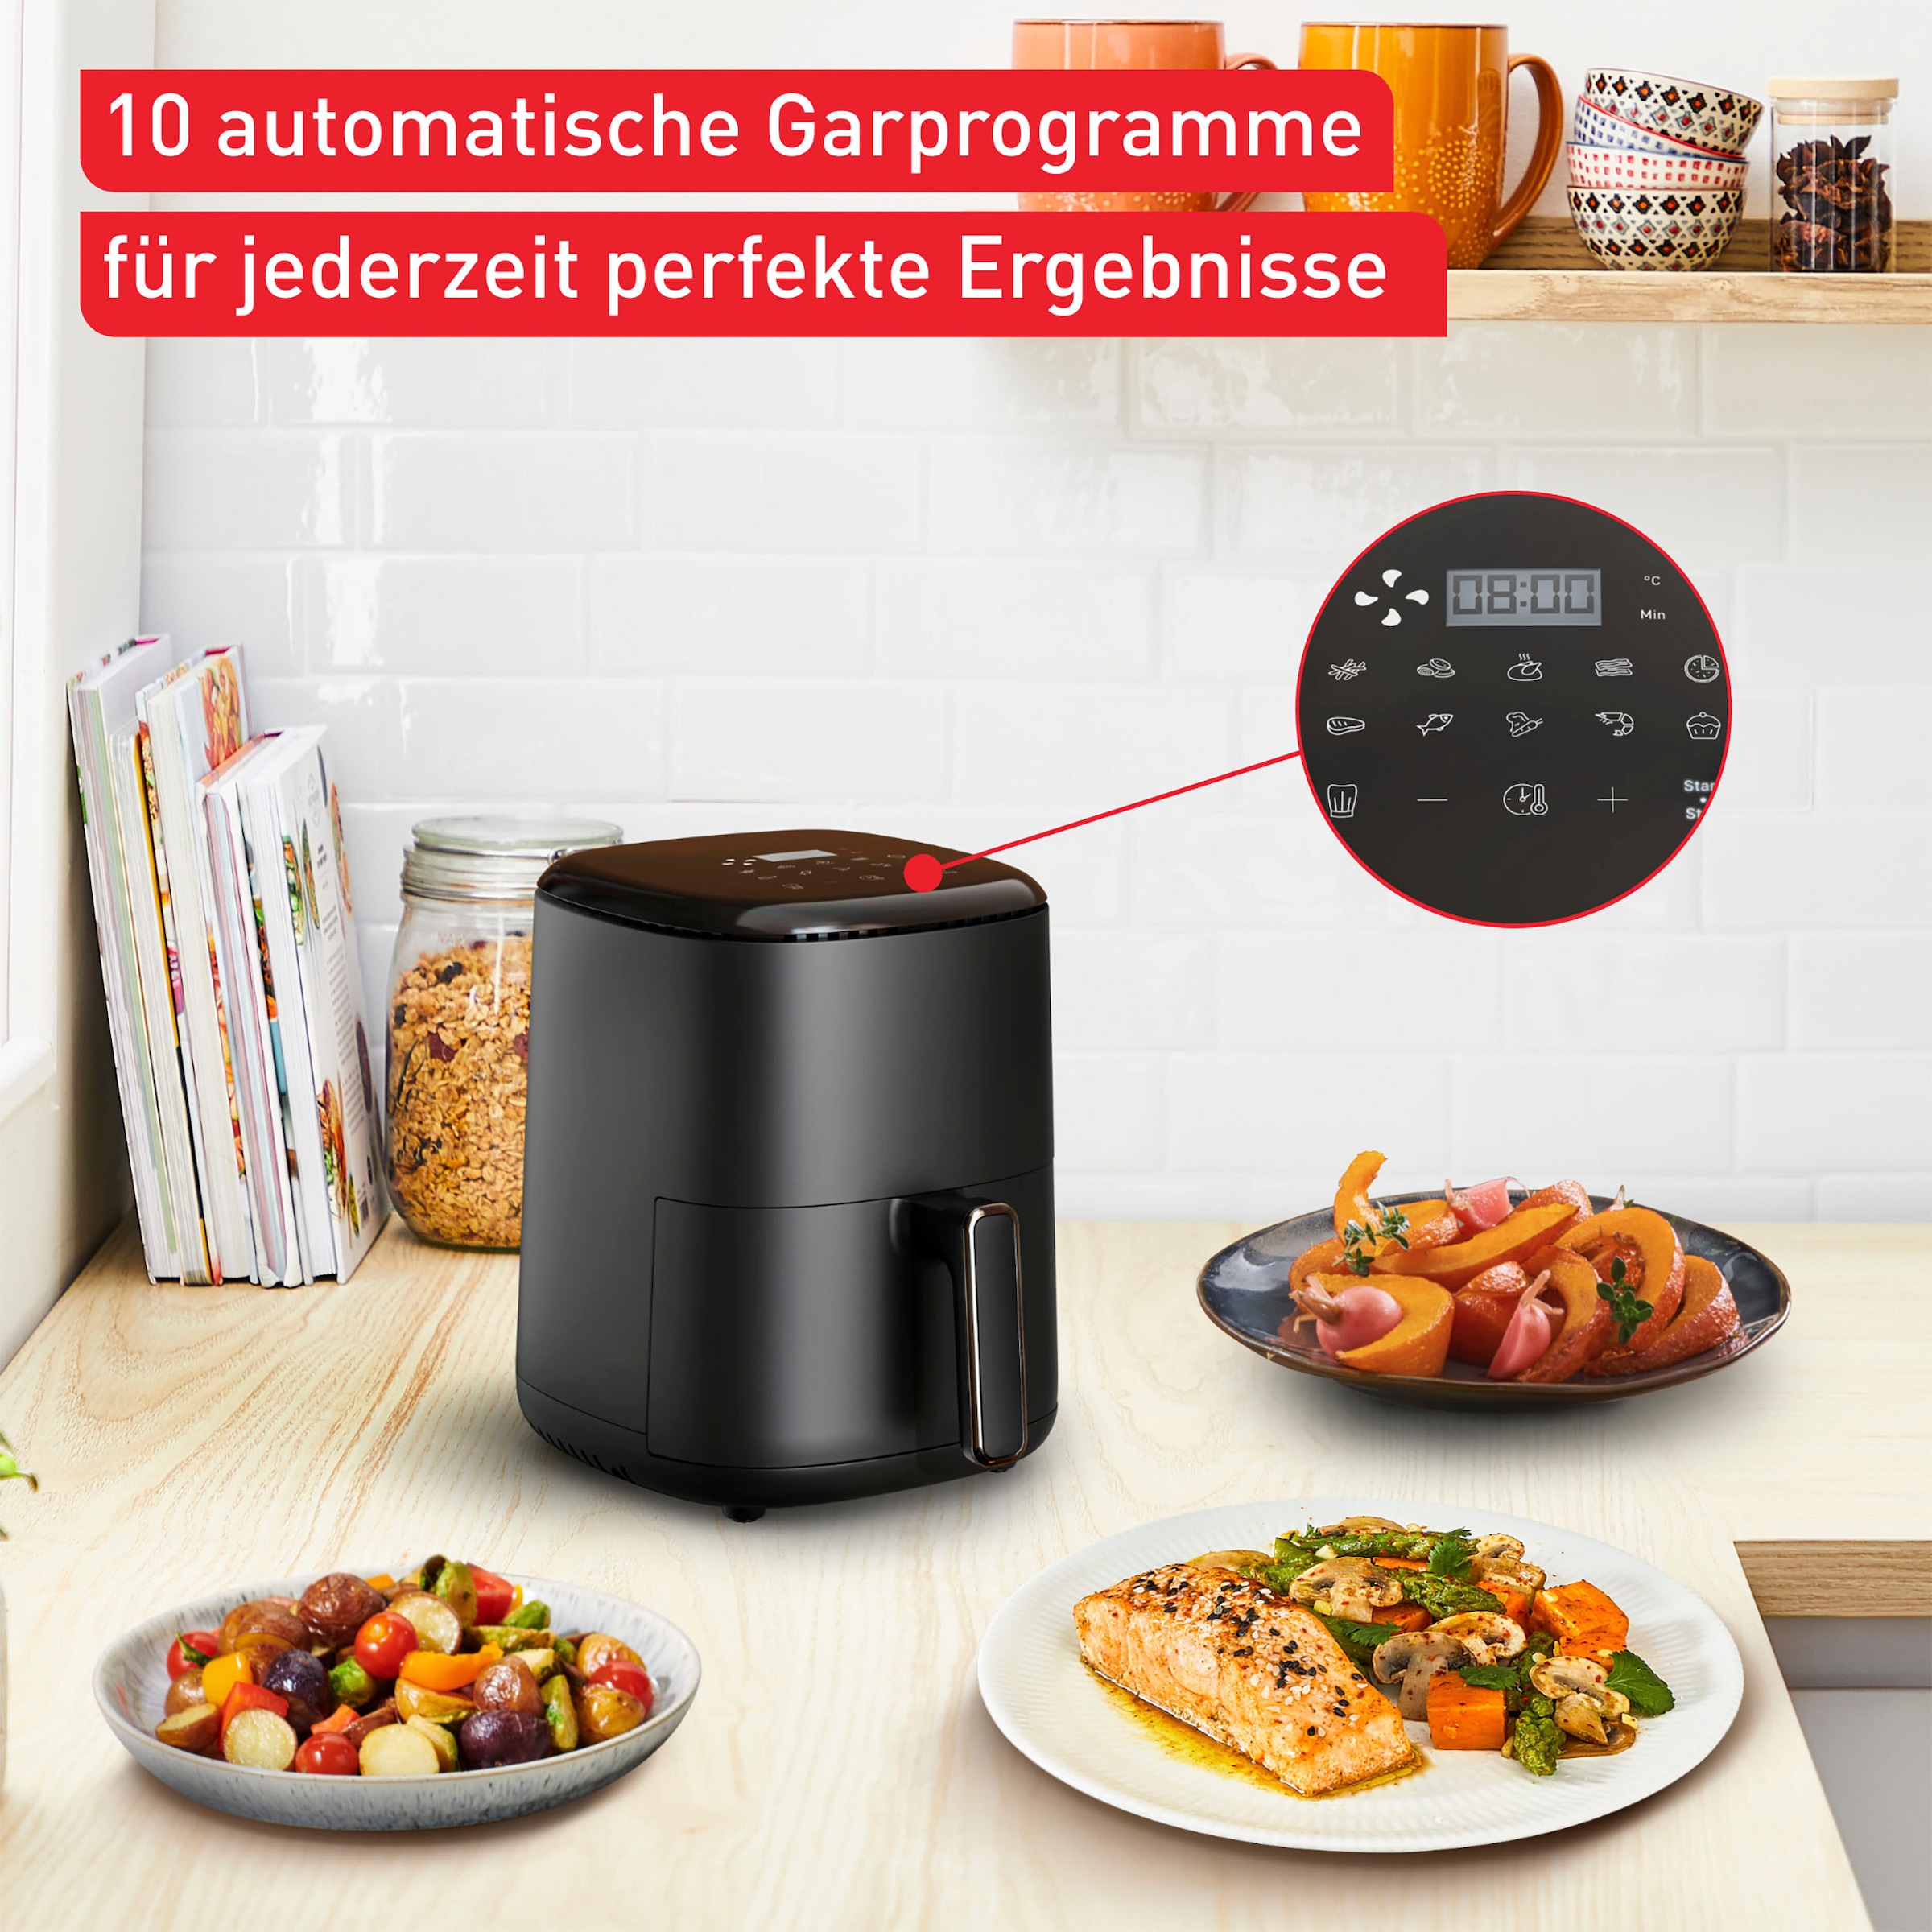 Easy Compact«, OTTO Tefal »EY1458 1300 im Heißluftfritteuse Shop Fry W Online